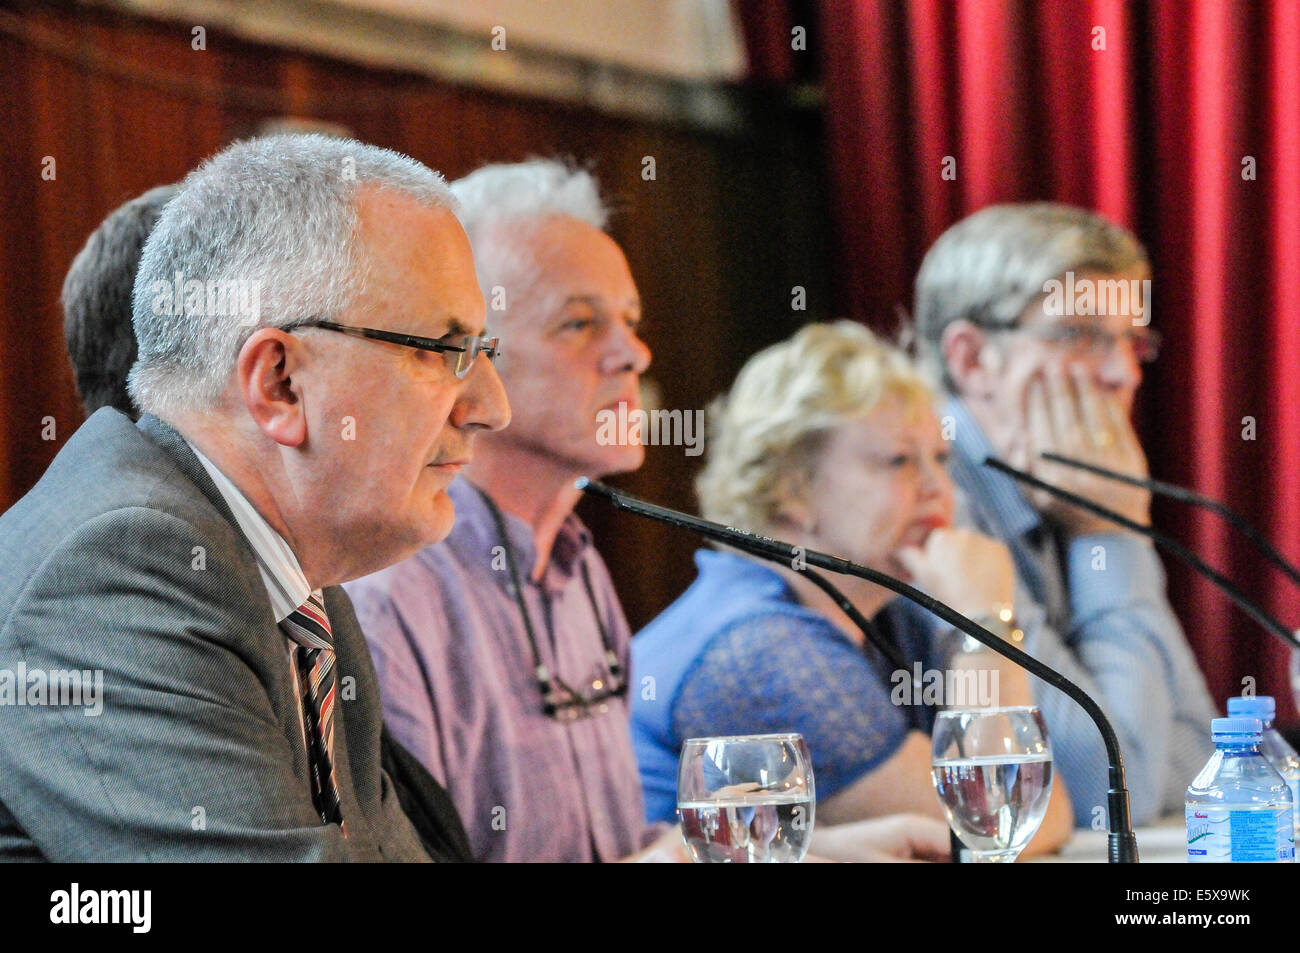 Belfast, Northern Ireland. 6th Aug 2014 - John O'Dowd, Danny Kennedy, Father Tim Bartlett and Rev Lesley Carroll in discussion at West Belfast Talks Back, chaired by Noel Thompson. Credit:  Stephen Barnes/Alamy Live News Stock Photo